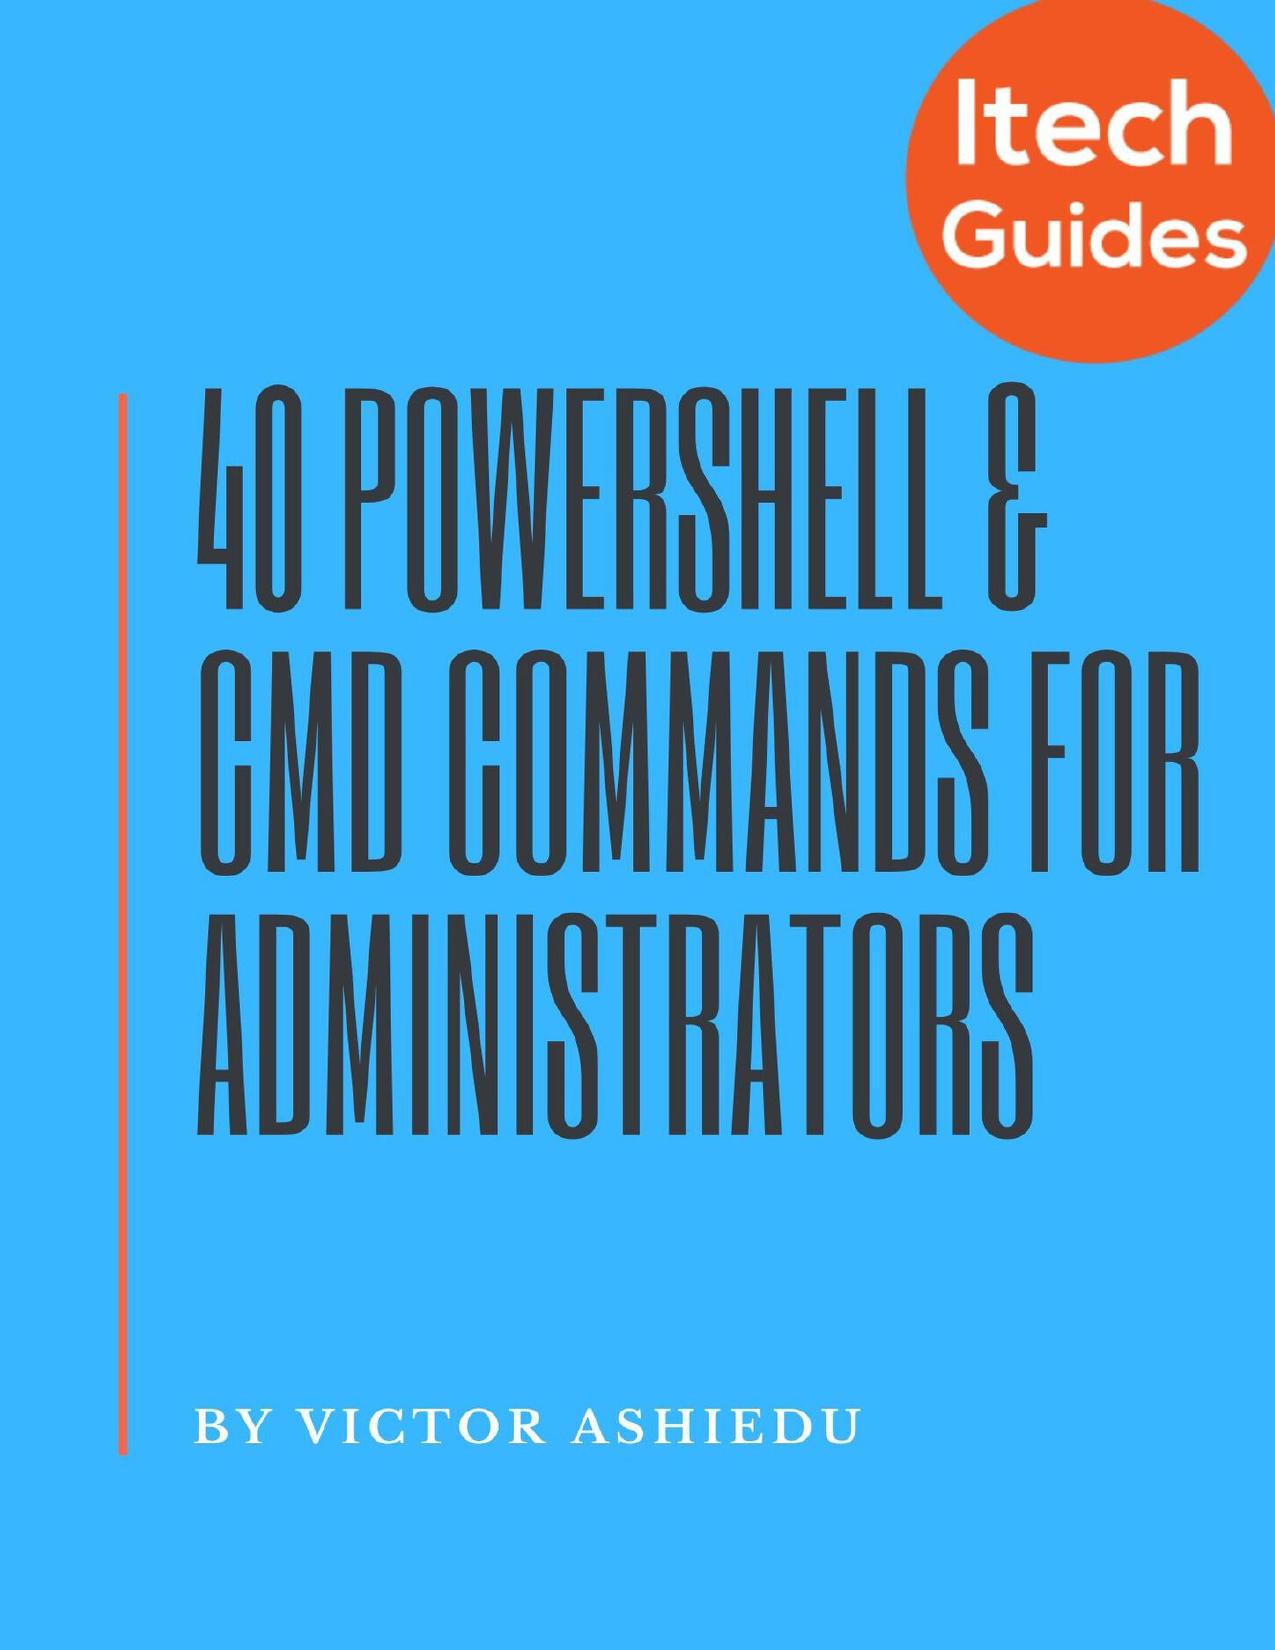 40 Most Useful PowerShell and Command Prompt Commands for Windows Administrators